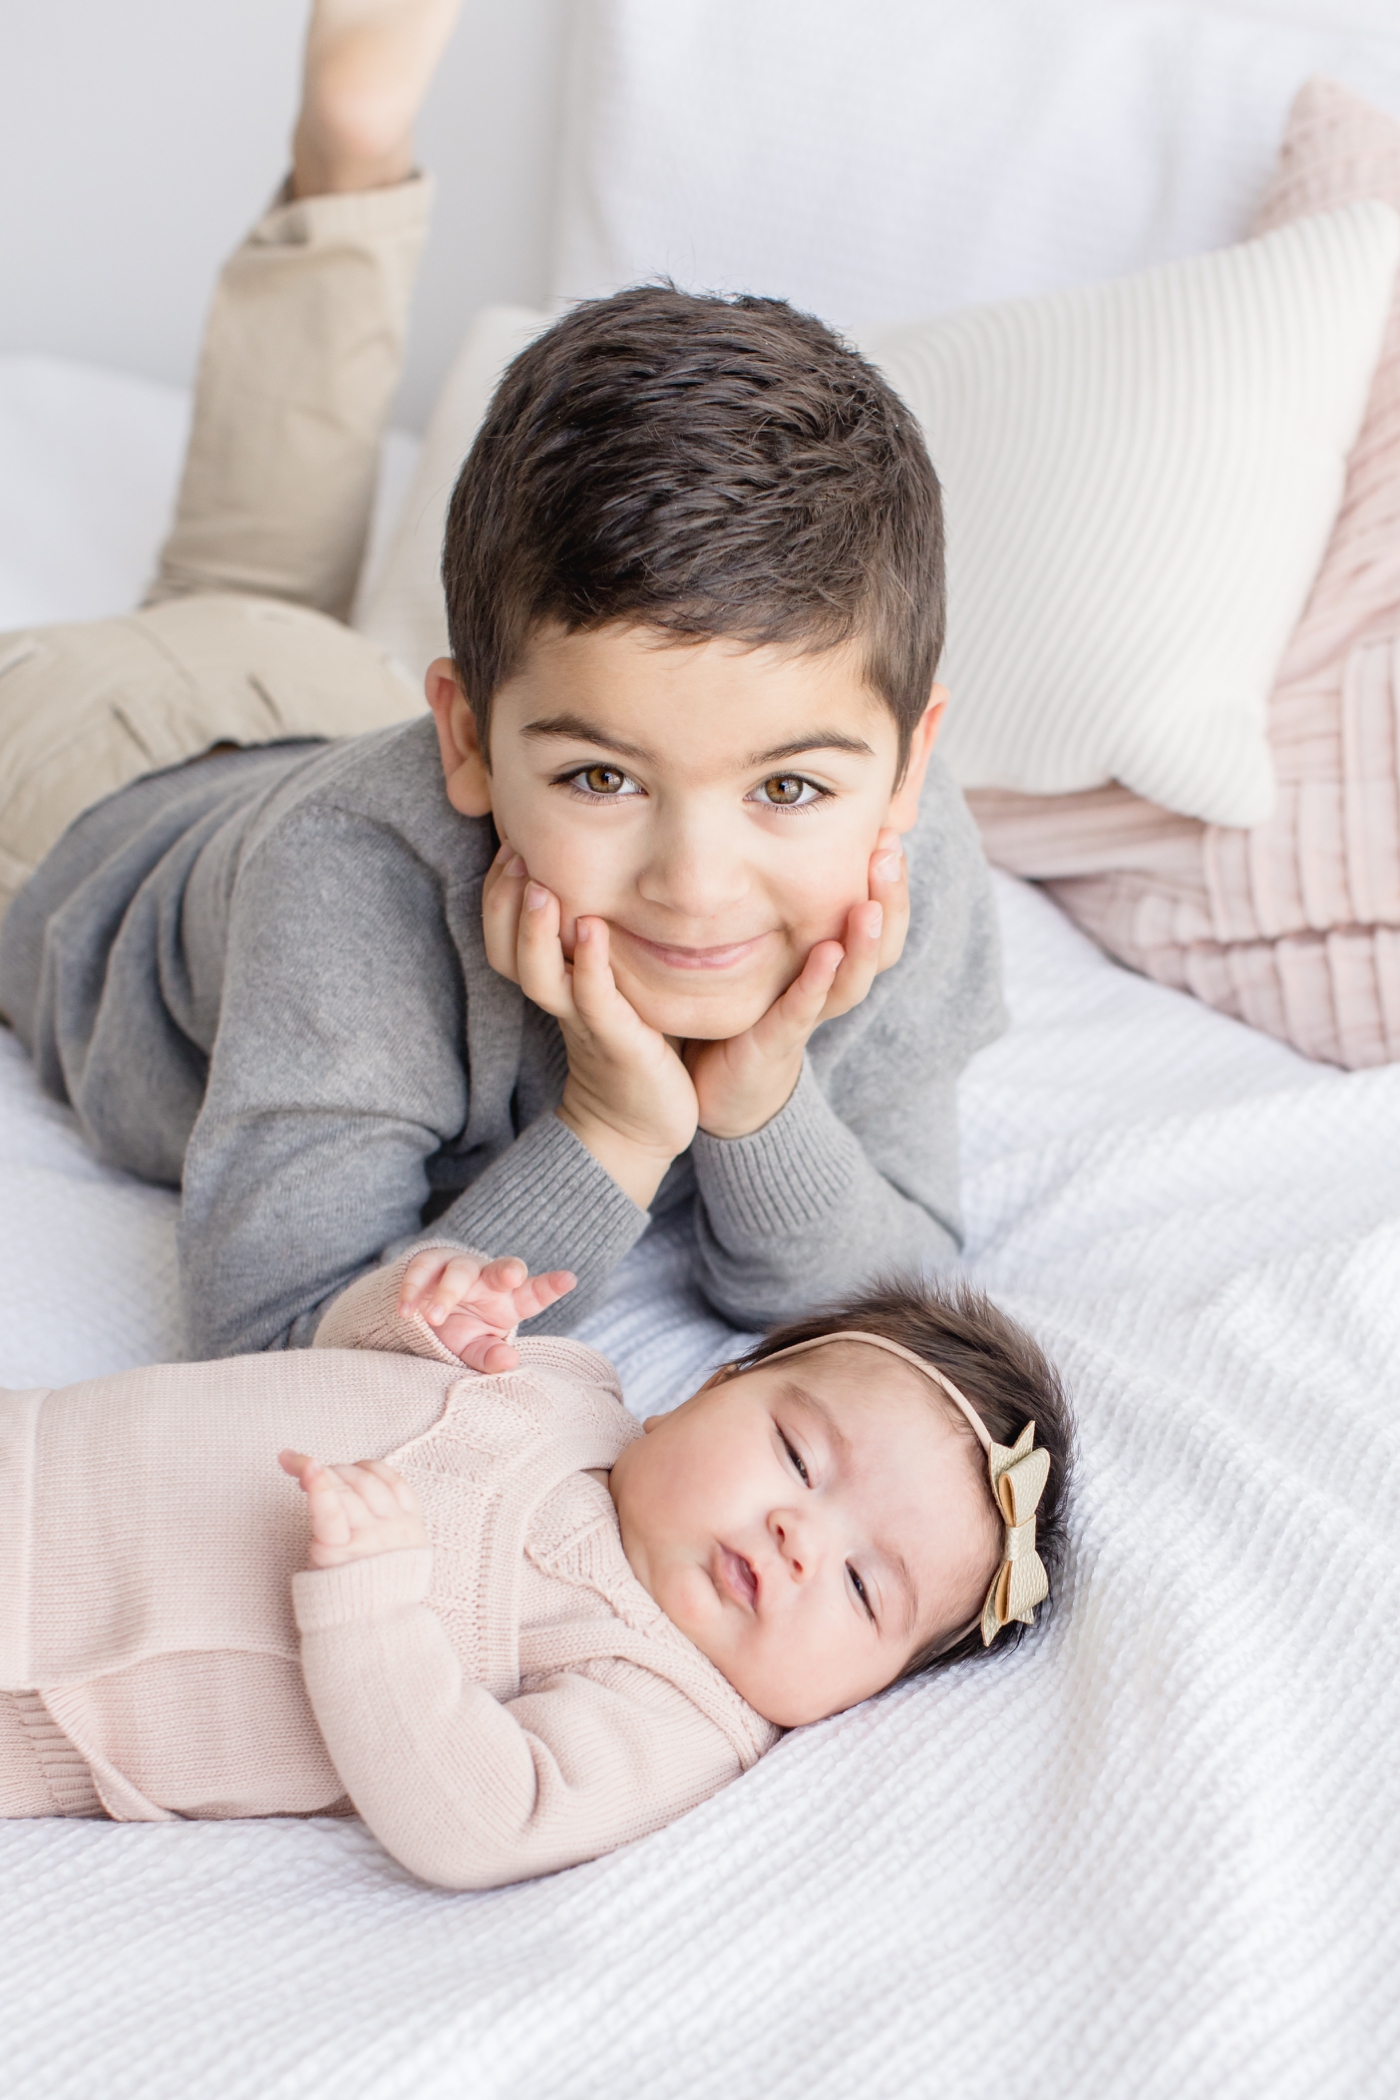 Big brother posing with baby sister on bed. Photo by Sana Ahmed Photography.